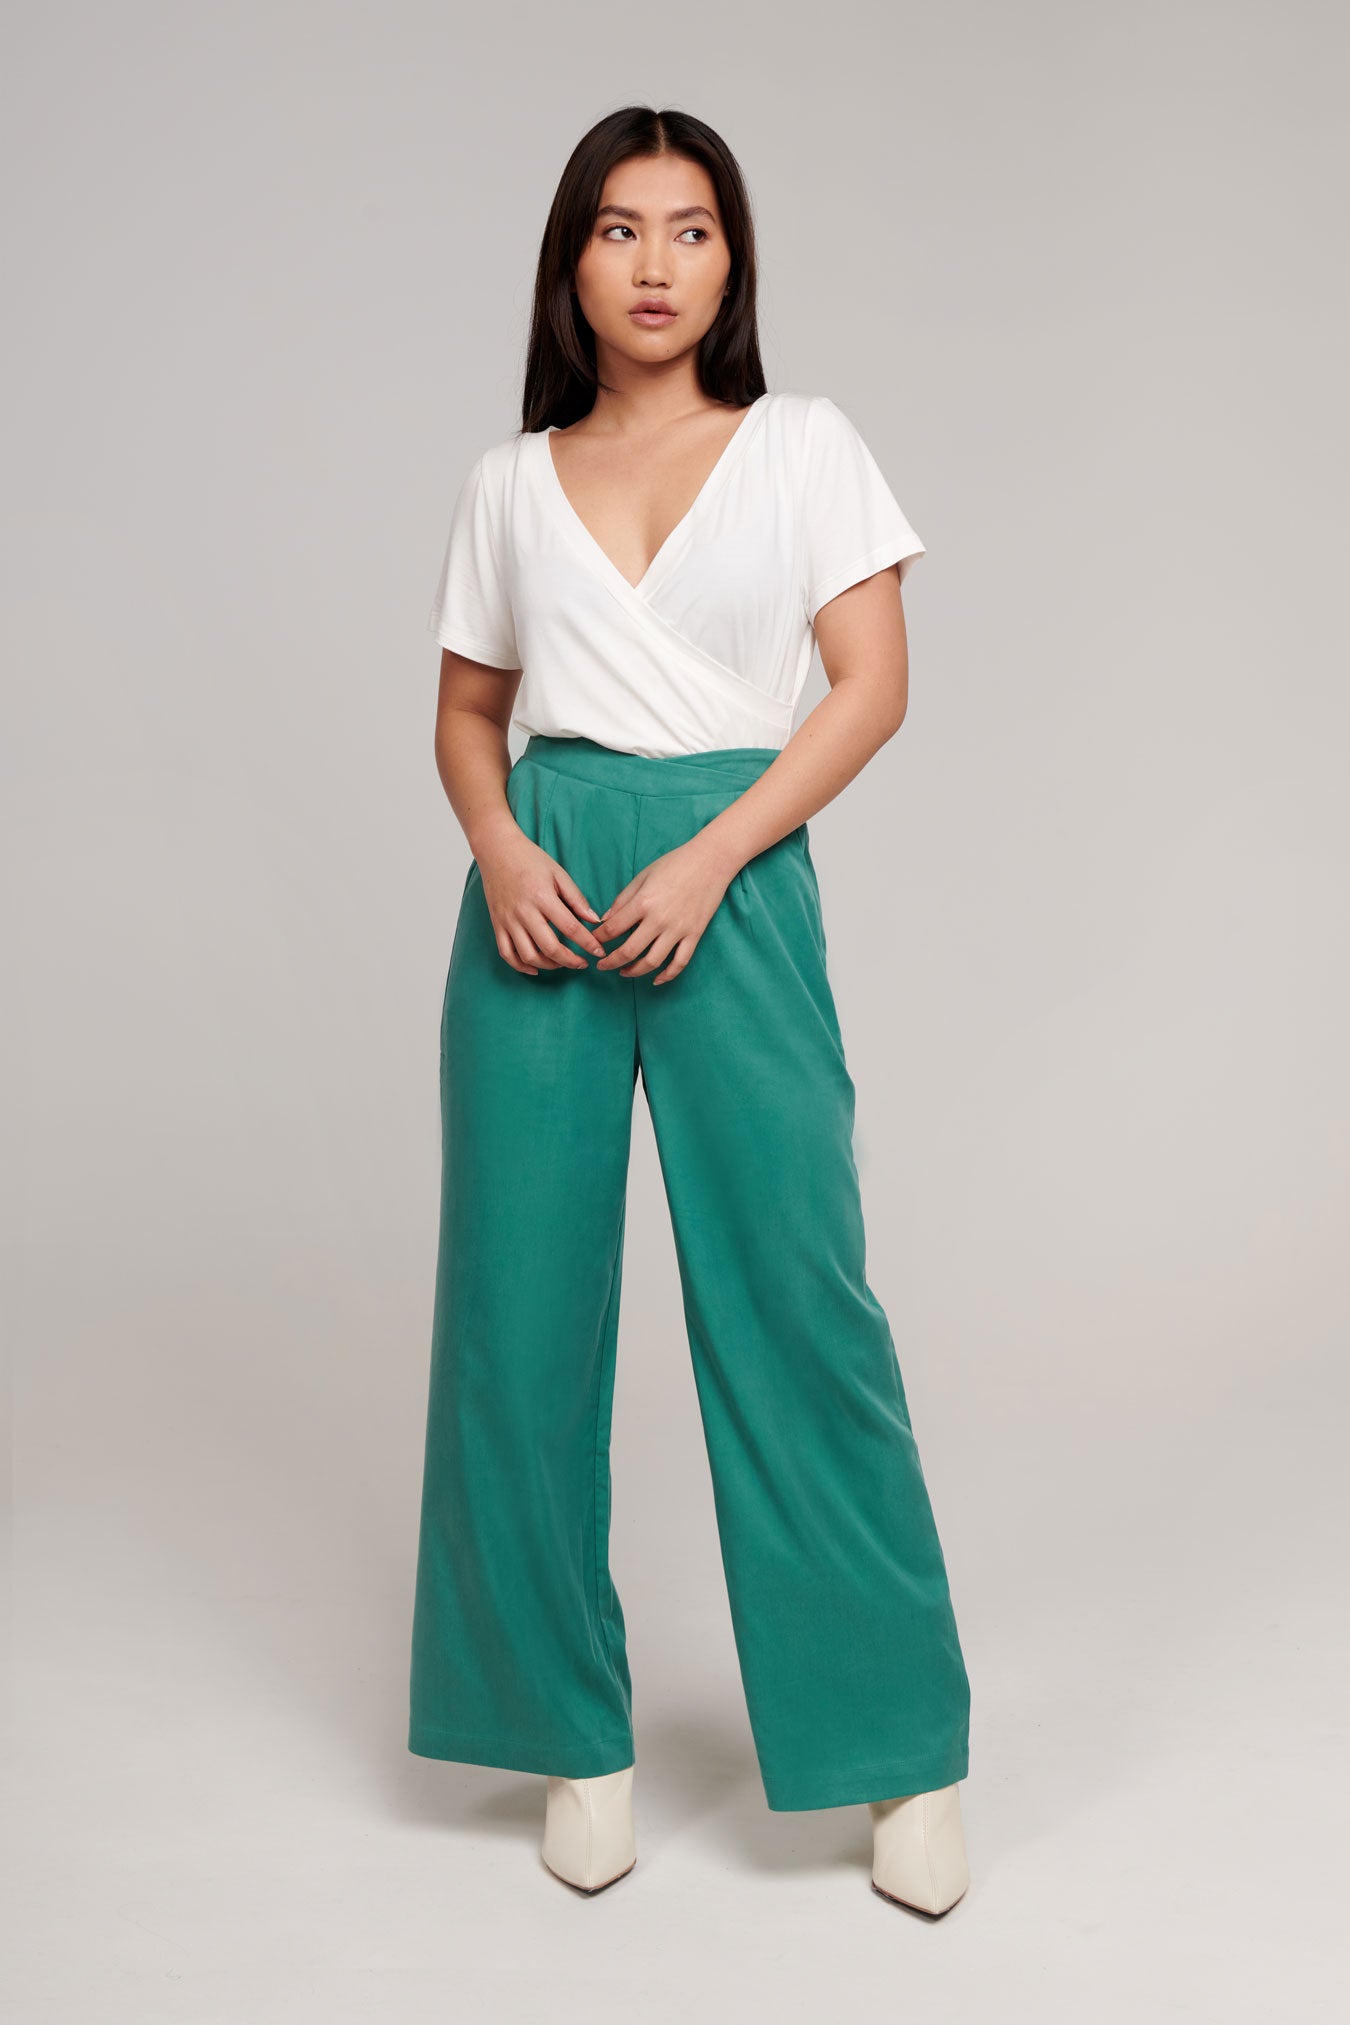 https://ergonaut.co/cdn/shop/products/professional-woman-in-soft-white-modal-wrap-top-and-soft-high-waisted-green-work-pants---2649.jpg?v=1705026692&width=1445